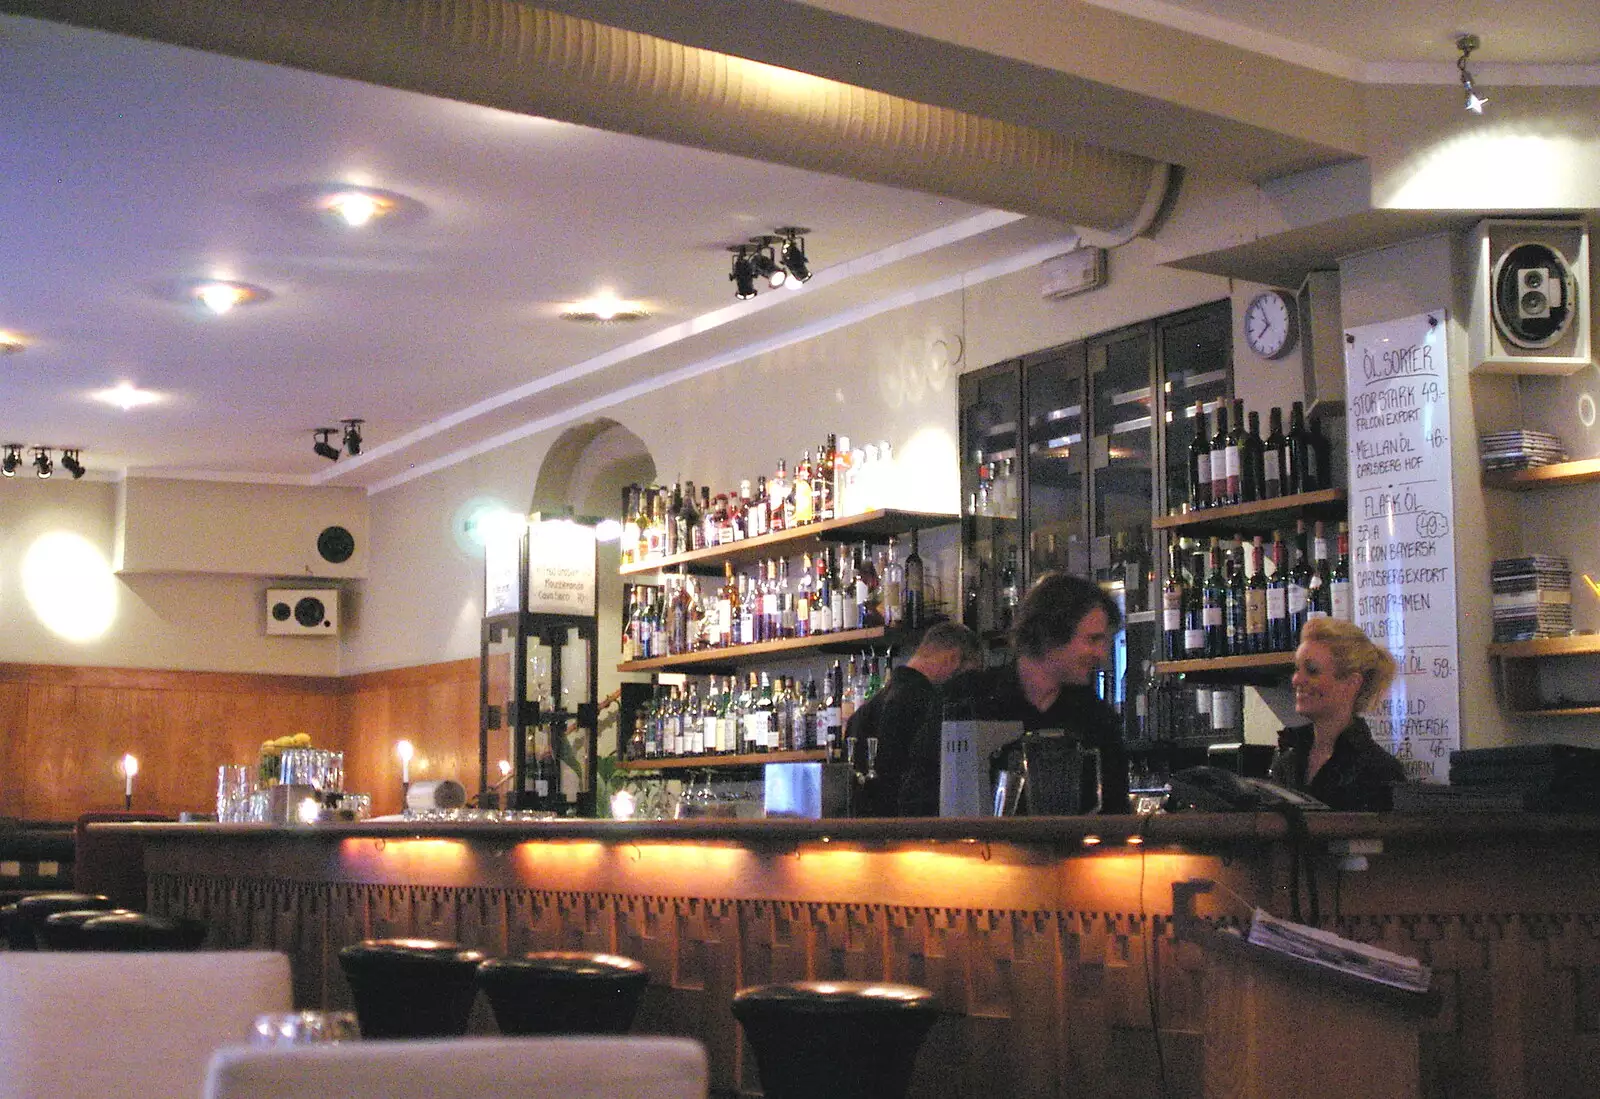 The bar of Totzvig restaurant, where we're eating, from A Postcard From Stockholm: A Working Trip to Sweden - 24th April 2005